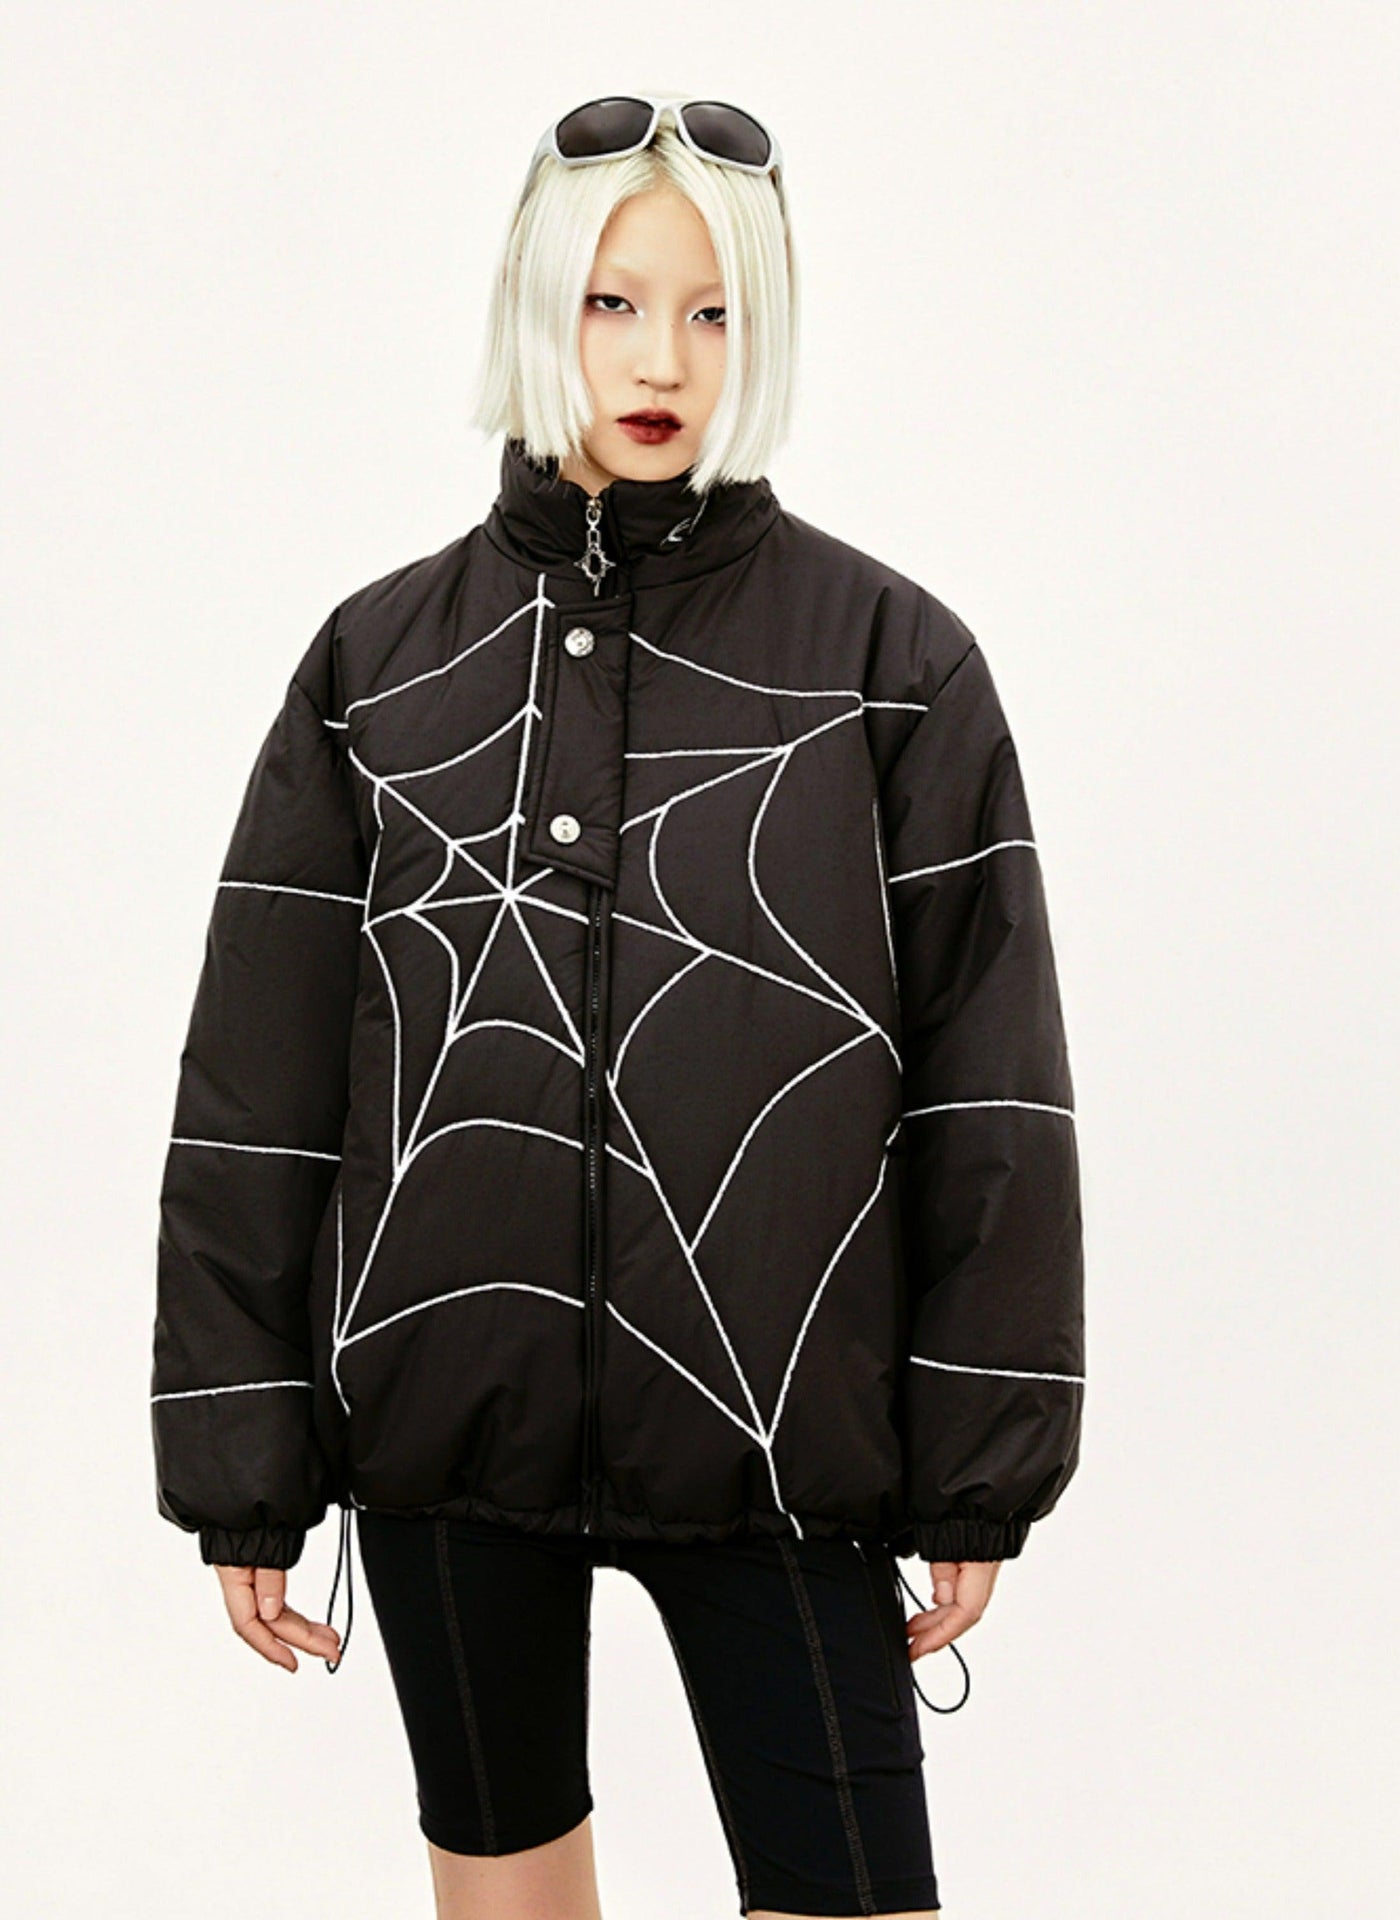 Stand Collar Spider Web Cotton Jacket Korean Street Fashion Jacket By Made Extreme Shop Online at OH Vault